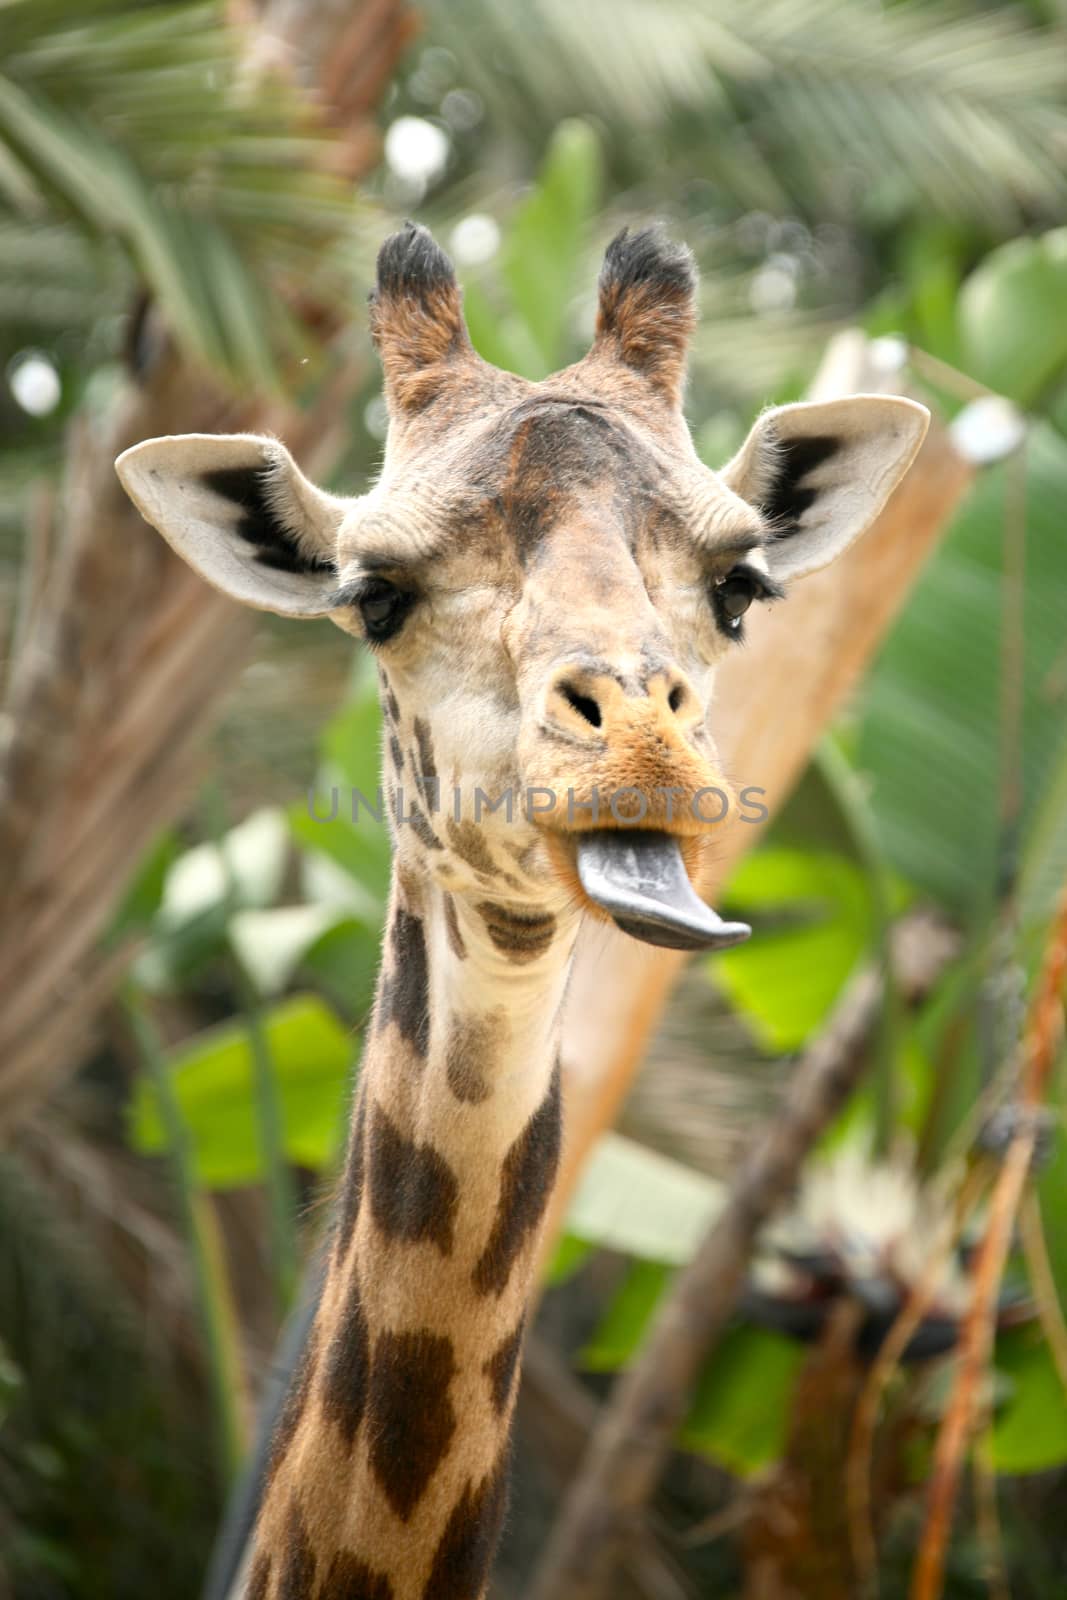 Hilarious Giraffe With Tongue Out by tobkatrina